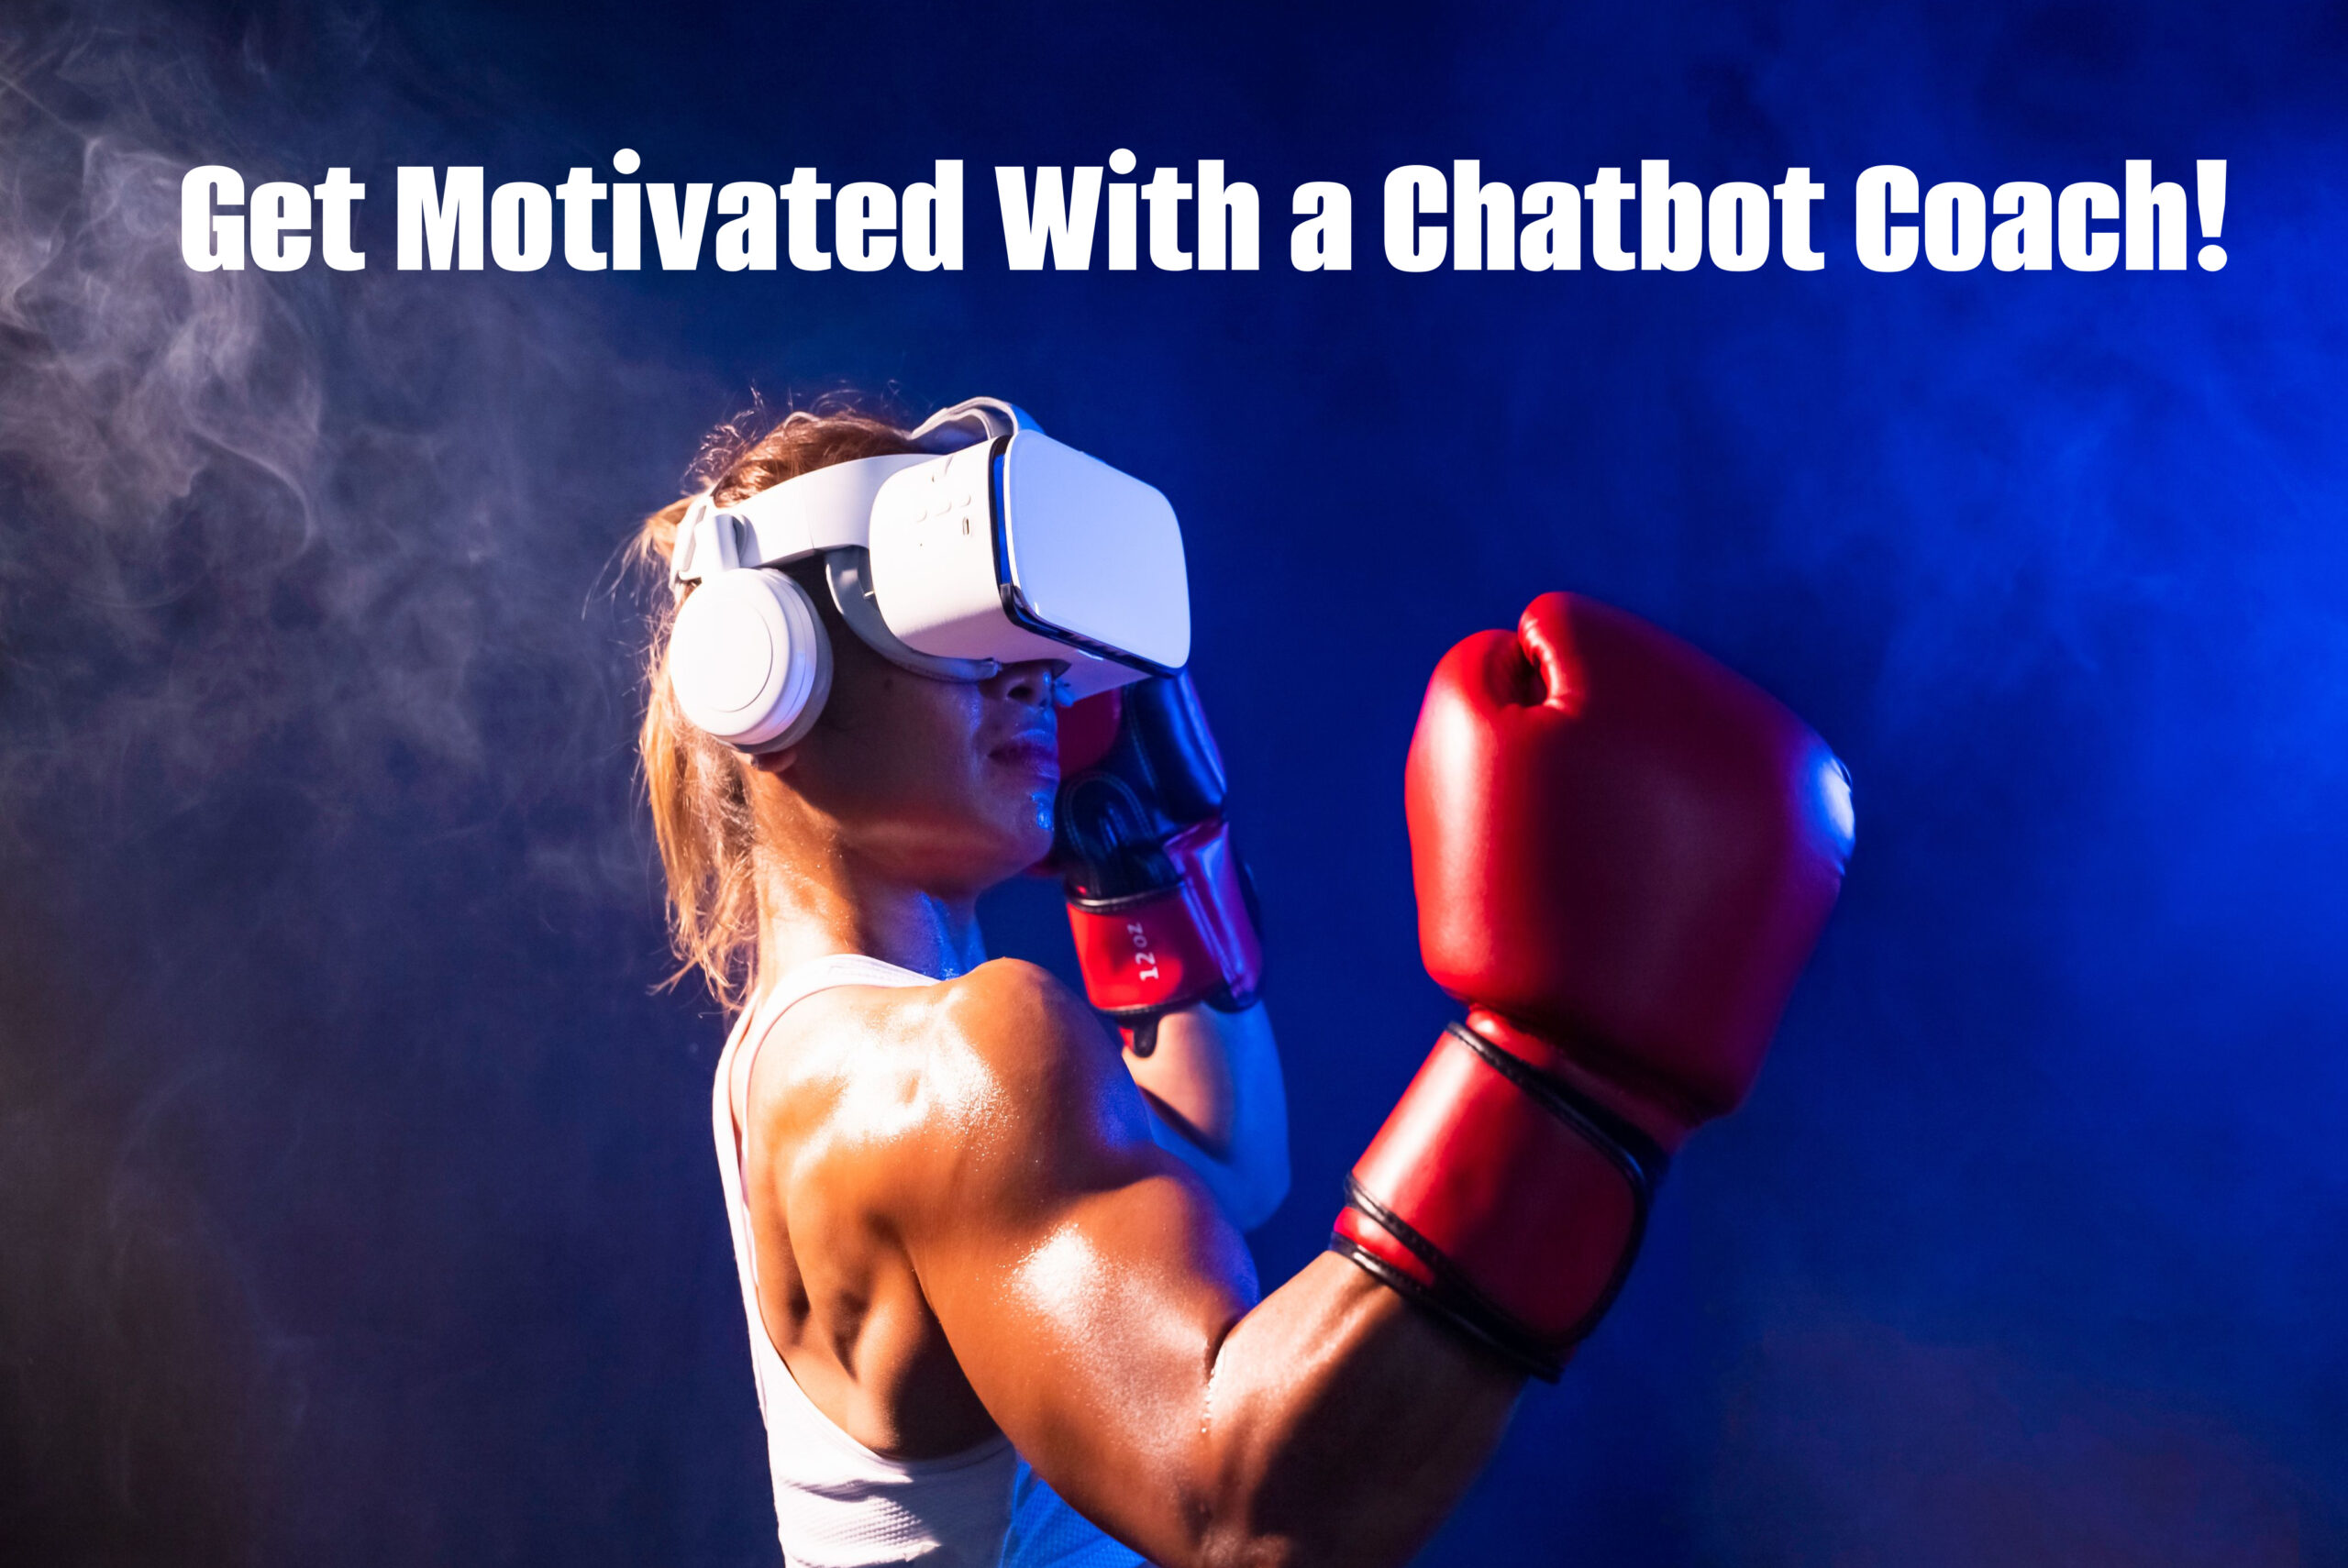 Chatbot Coaches Will Become our Motivators￼